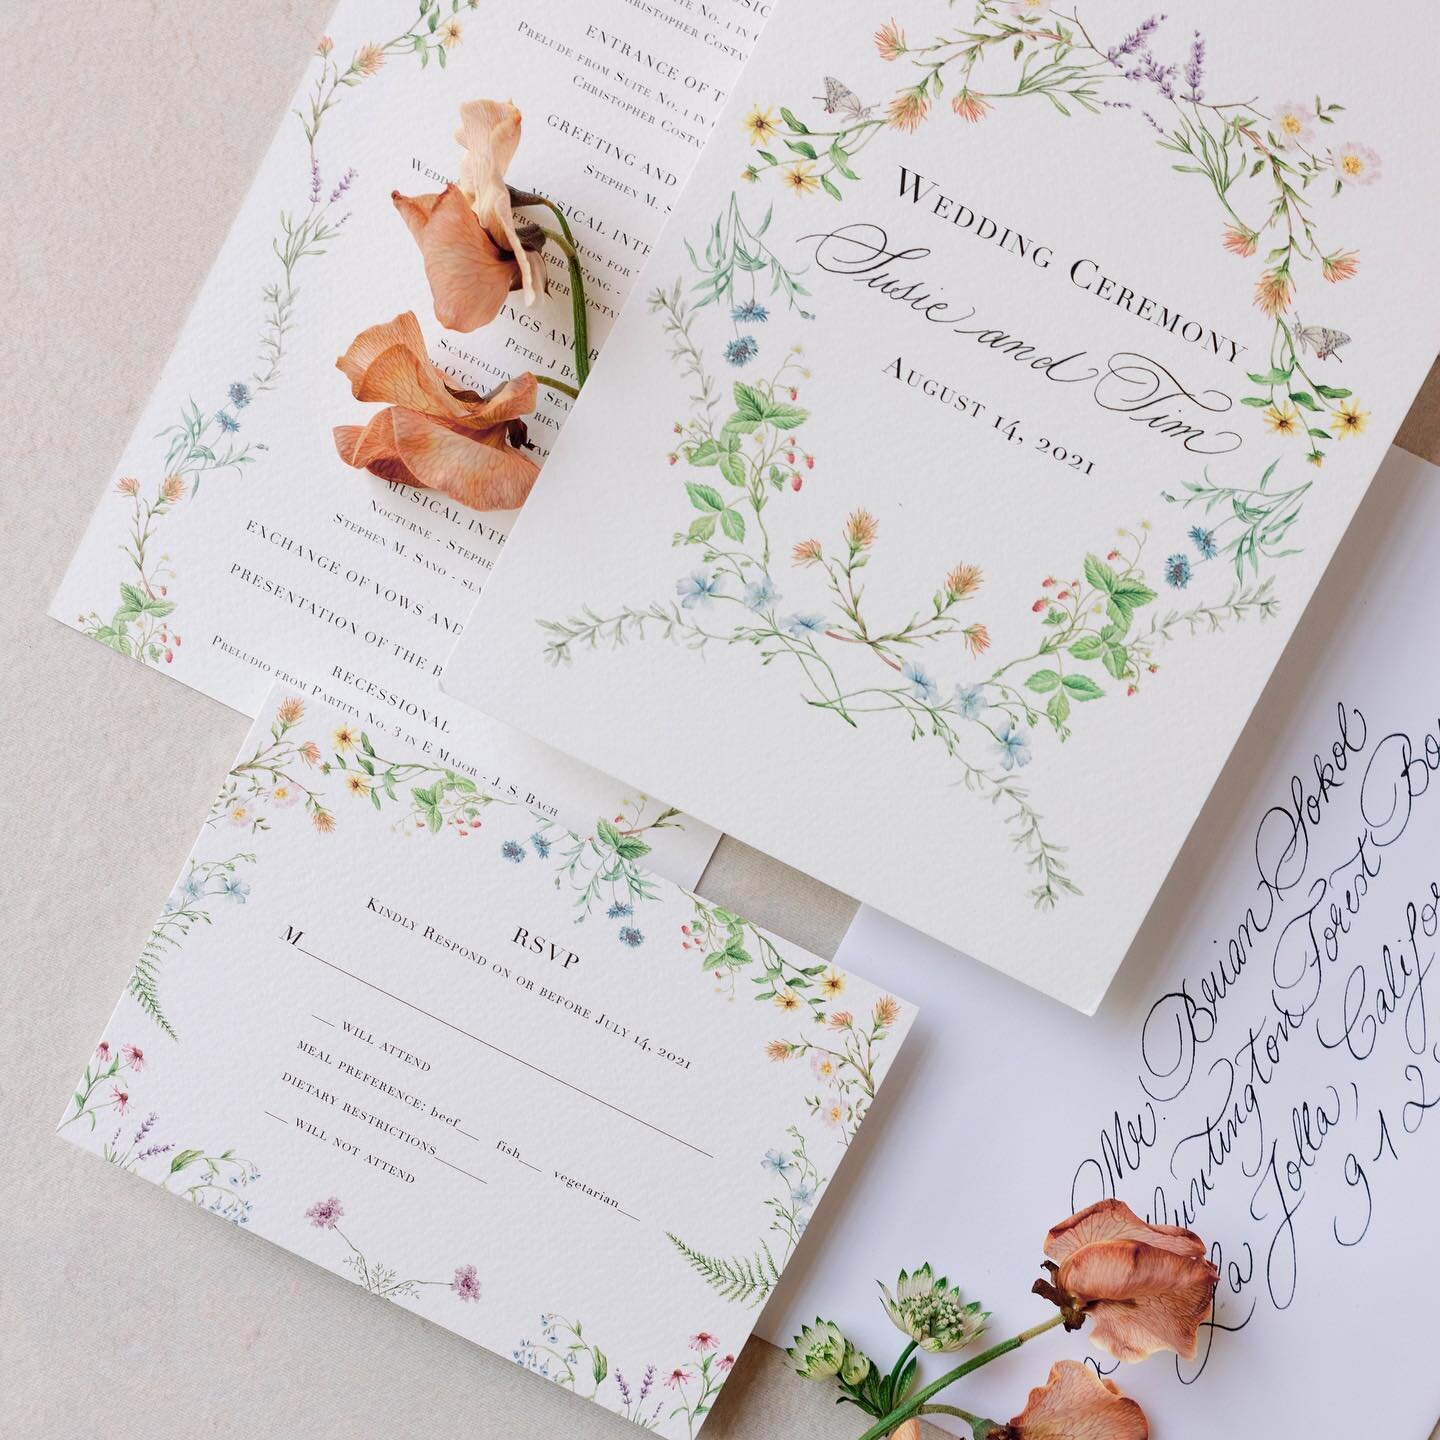 Wedding papers for S&amp;T, with florals native to Chicago and Santa Fe 🌿

Styling surface: @locustcollection 

#weddinginvitations #invitation #floralinvitation #watercolorinvitation #invitationsuite